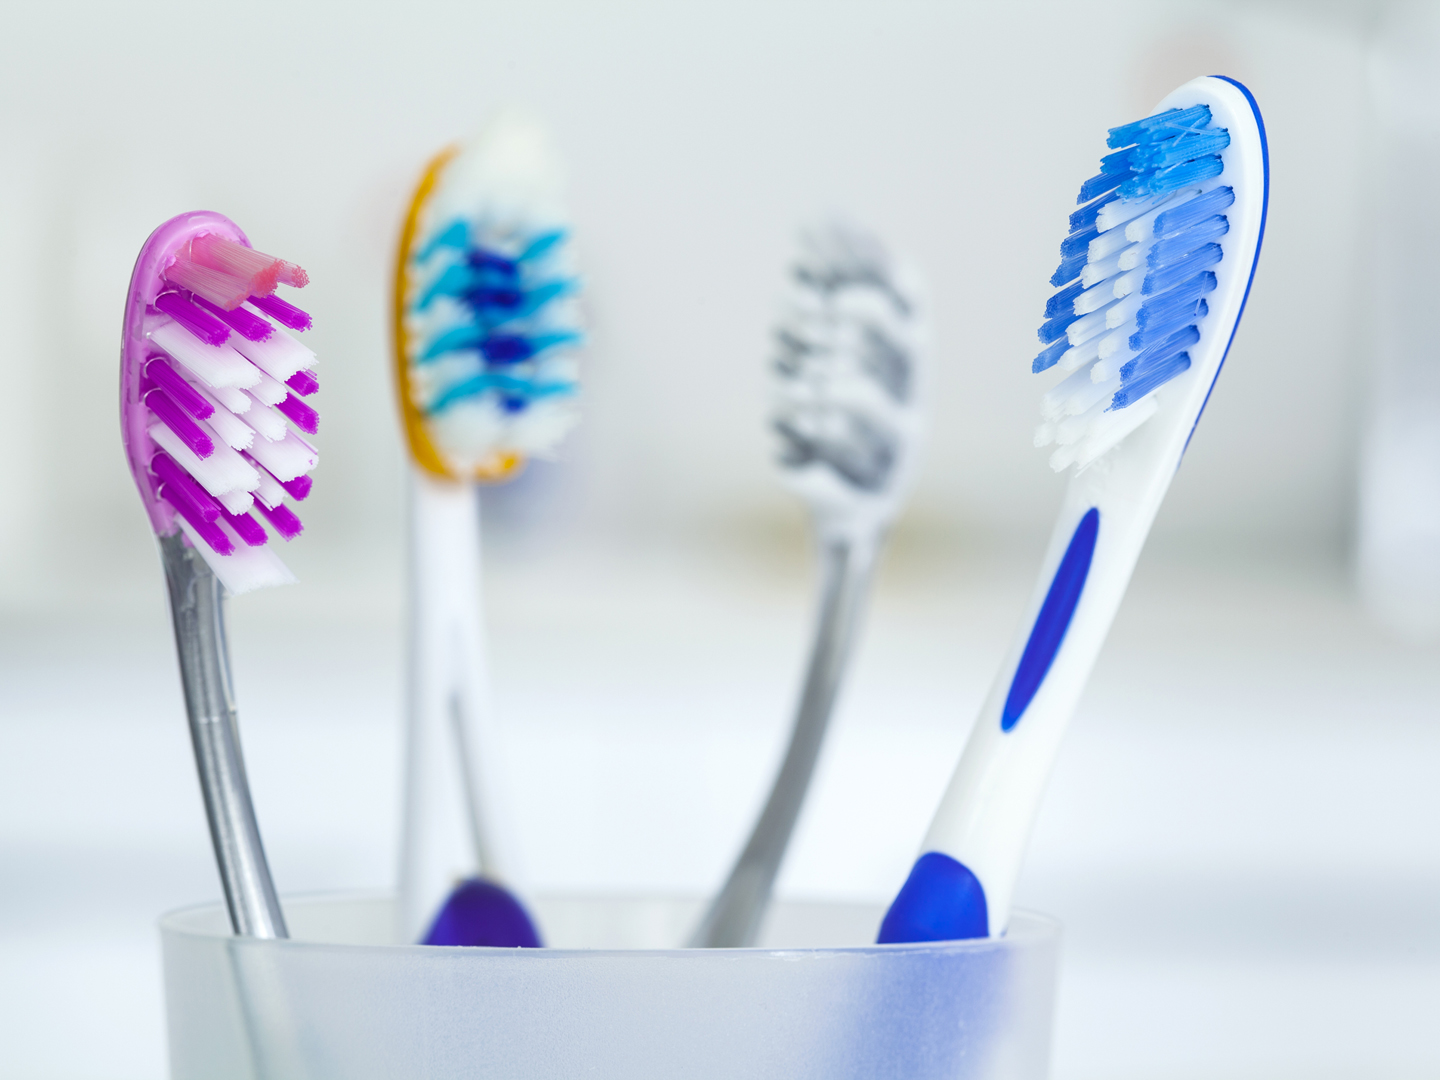 Tooth brushes in glass